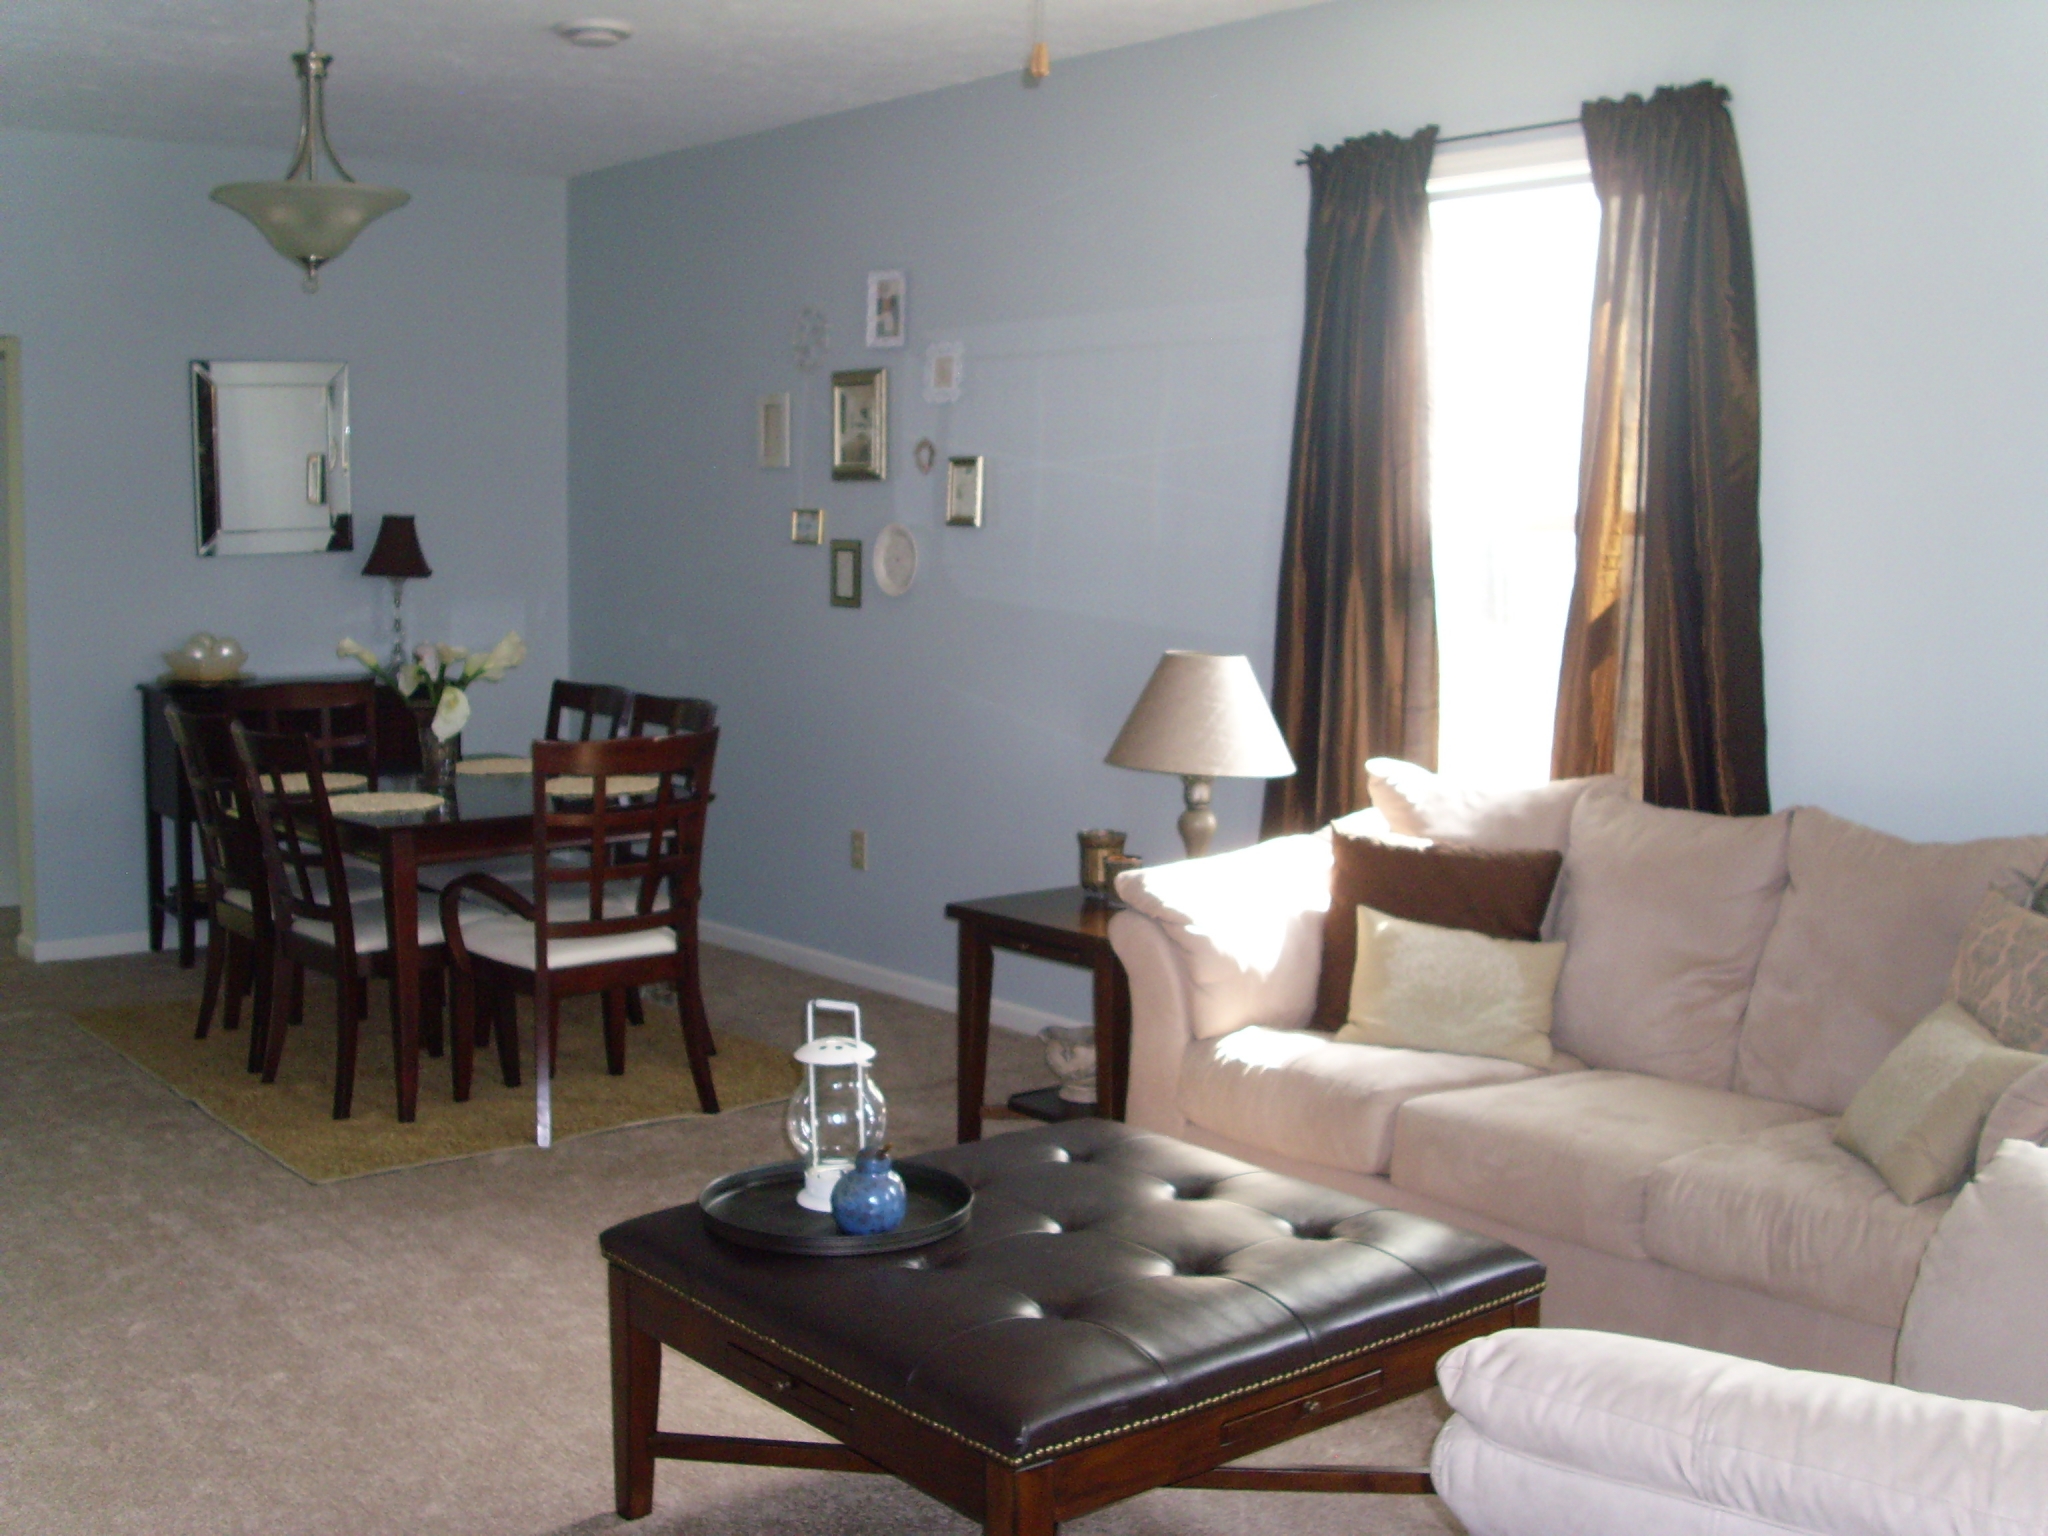 Four bedroom SNCO living room | apartment rentals fort drum ny